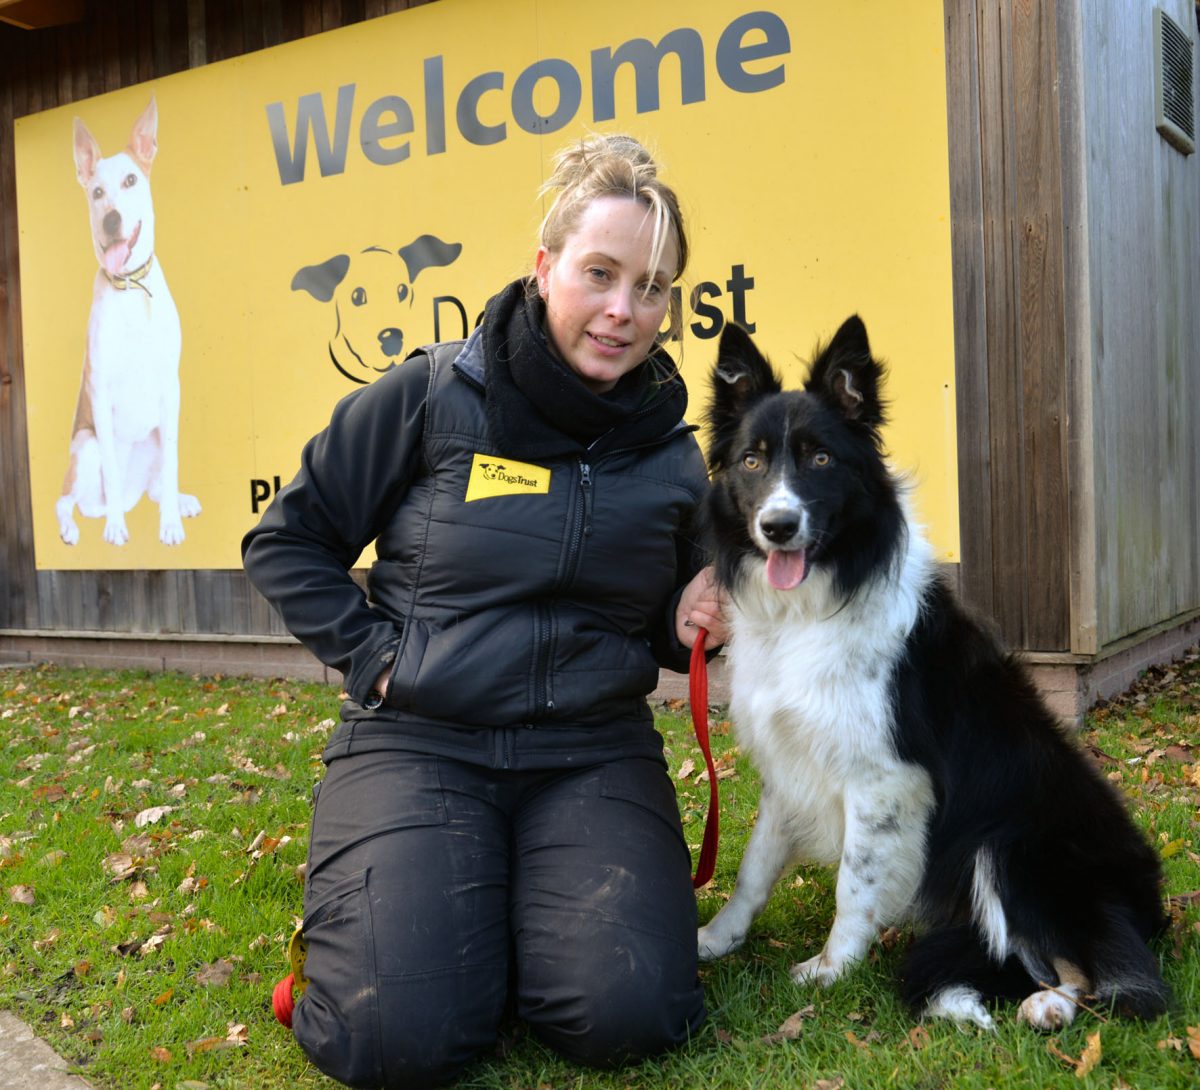 Dog rehoming centre prepares for unwanted dogs influx The Stratford